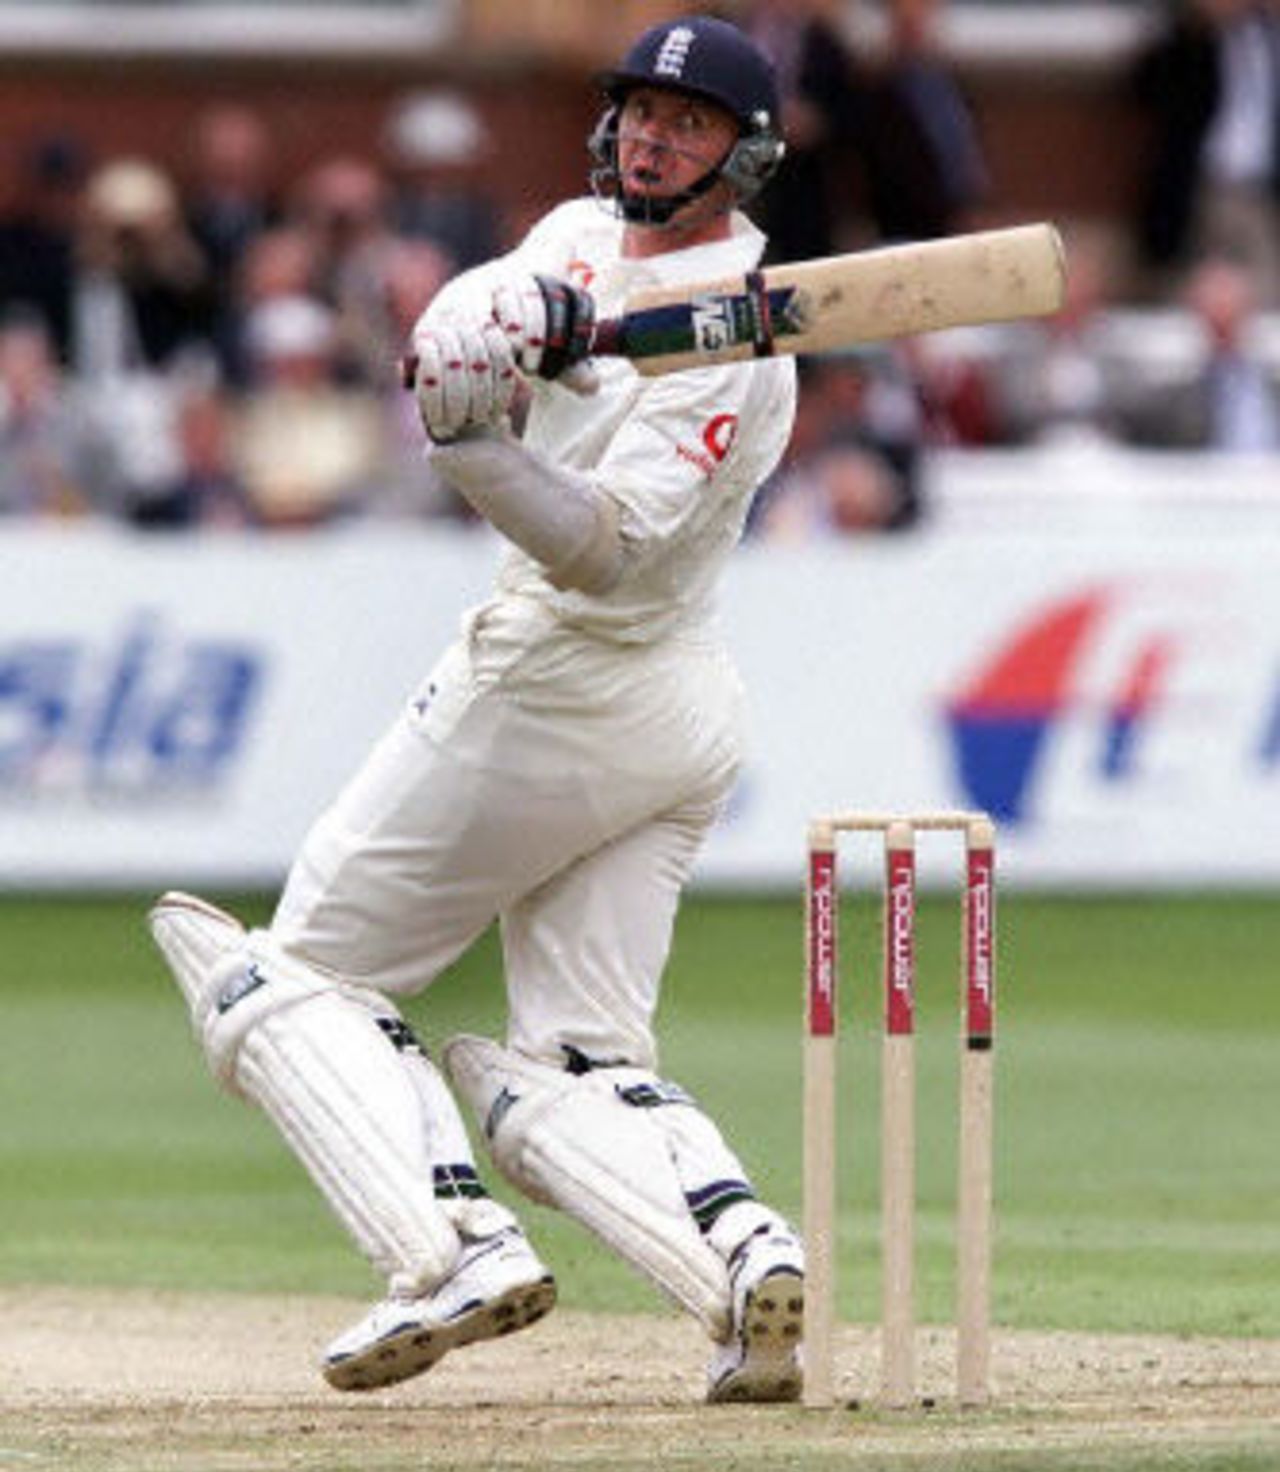 Cork plays a hook, day 3, 1st Test at Lord's, 17-21 May 2001.